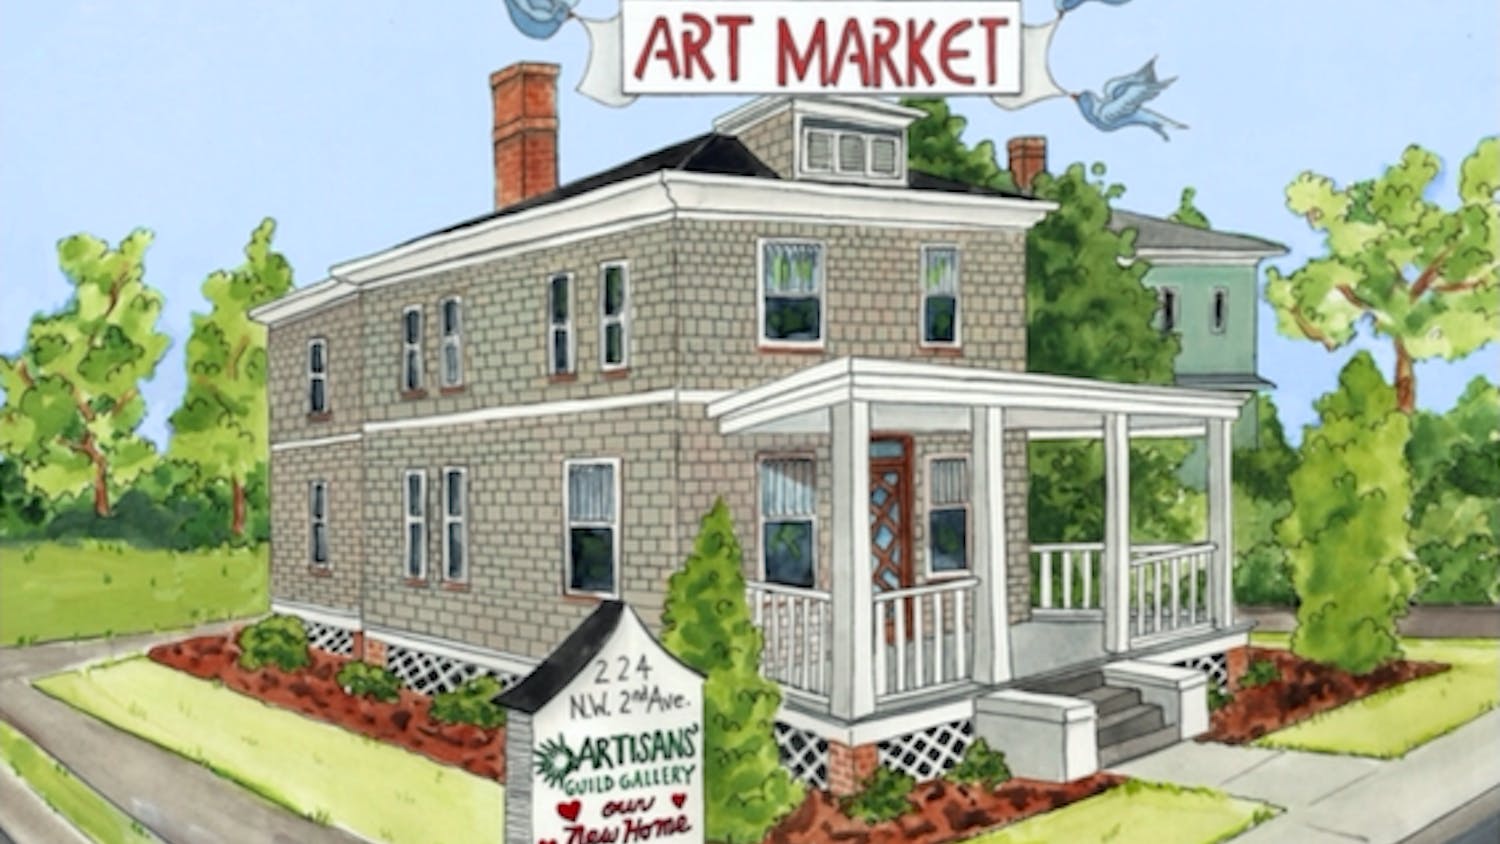 The Artisans' Guild Guide is holding its first outdoor art market at its new gallery location at&nbsp;224 NW Second Ave. in downtown Gainesville.&nbsp;